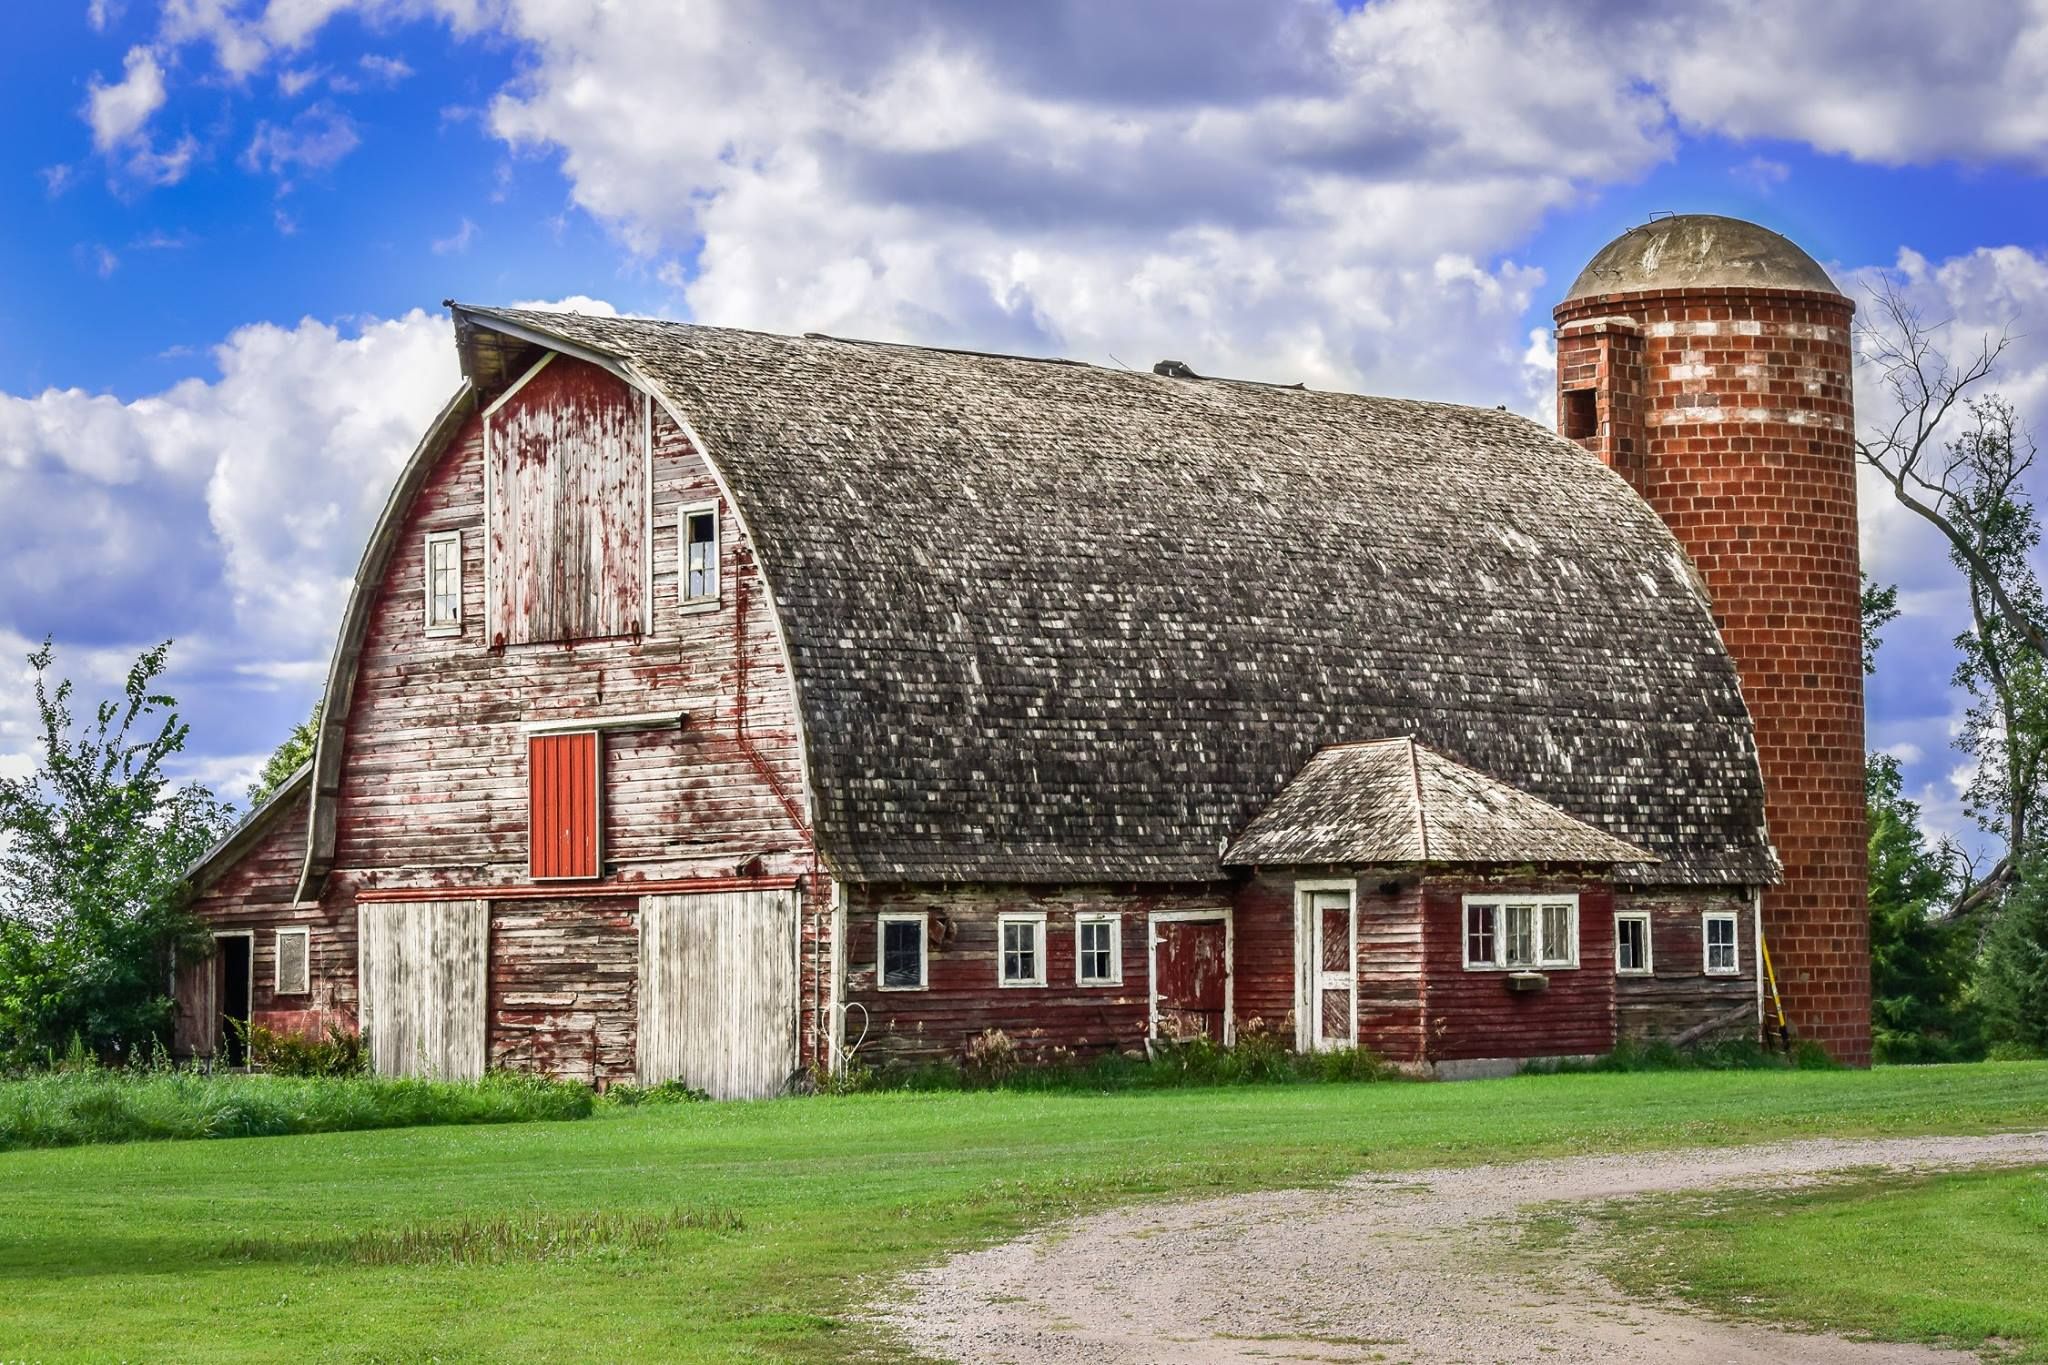 Stunning Pictures of Old Barns from Around the World